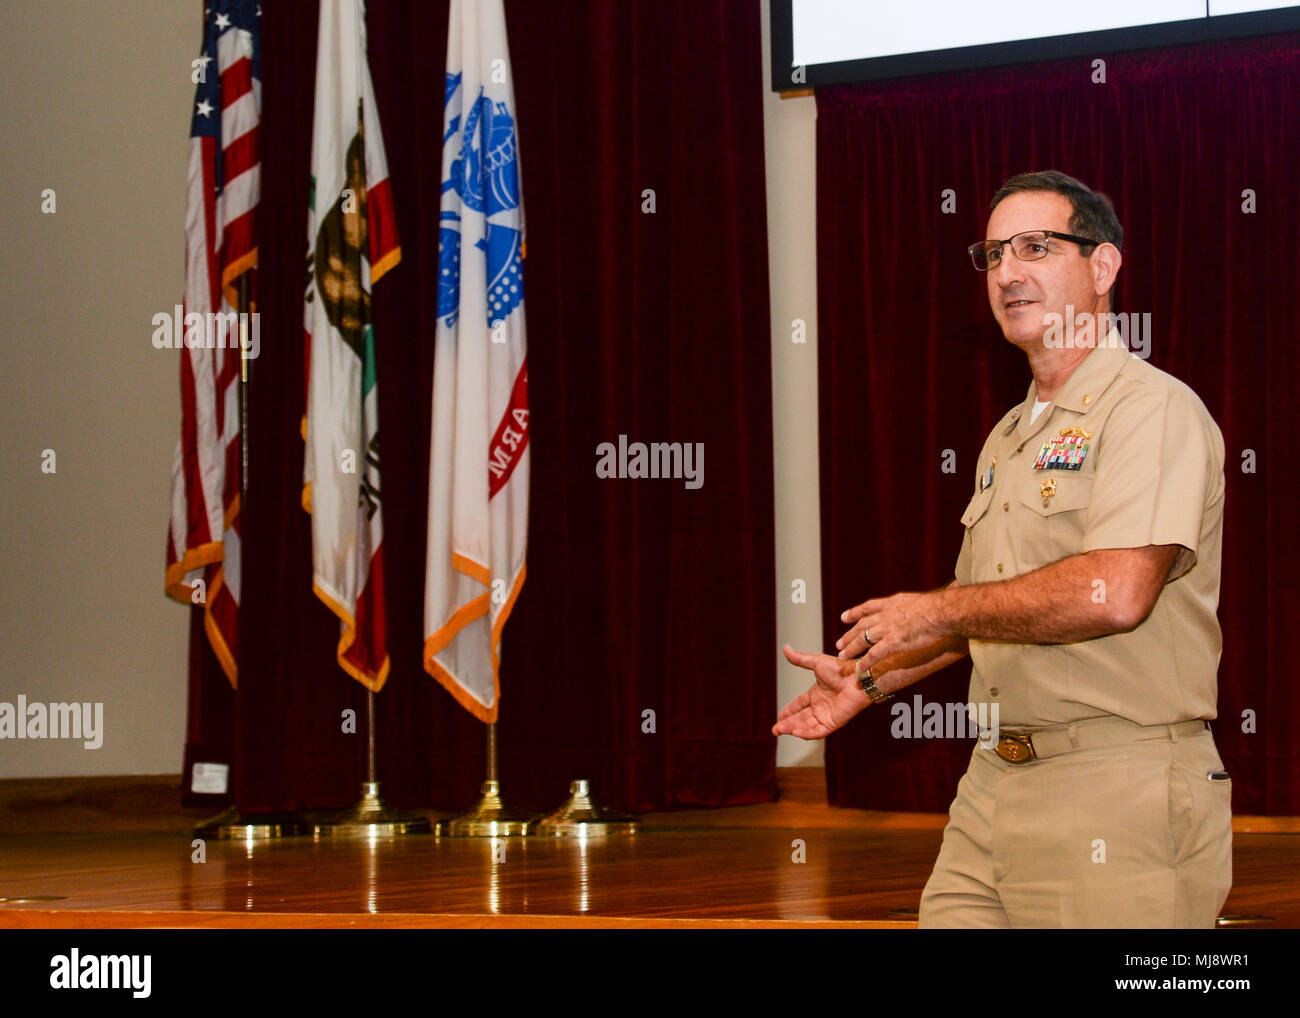 180420-N-PN275-1005 SAN DIEGO (April 20, 2018)  Capt. Joel Roos, commanding officer of Naval Medical Center San Diego (NMCSD) makes opening remarks at the 33rd annual Academic Research Competition. The competition lets residents and doctors to competitively showcase their research with speeches and board displays. (U.S. Navy Photo by Mass Communication Specialist 2nd Class Zachary Kreitzer) Stock Photo